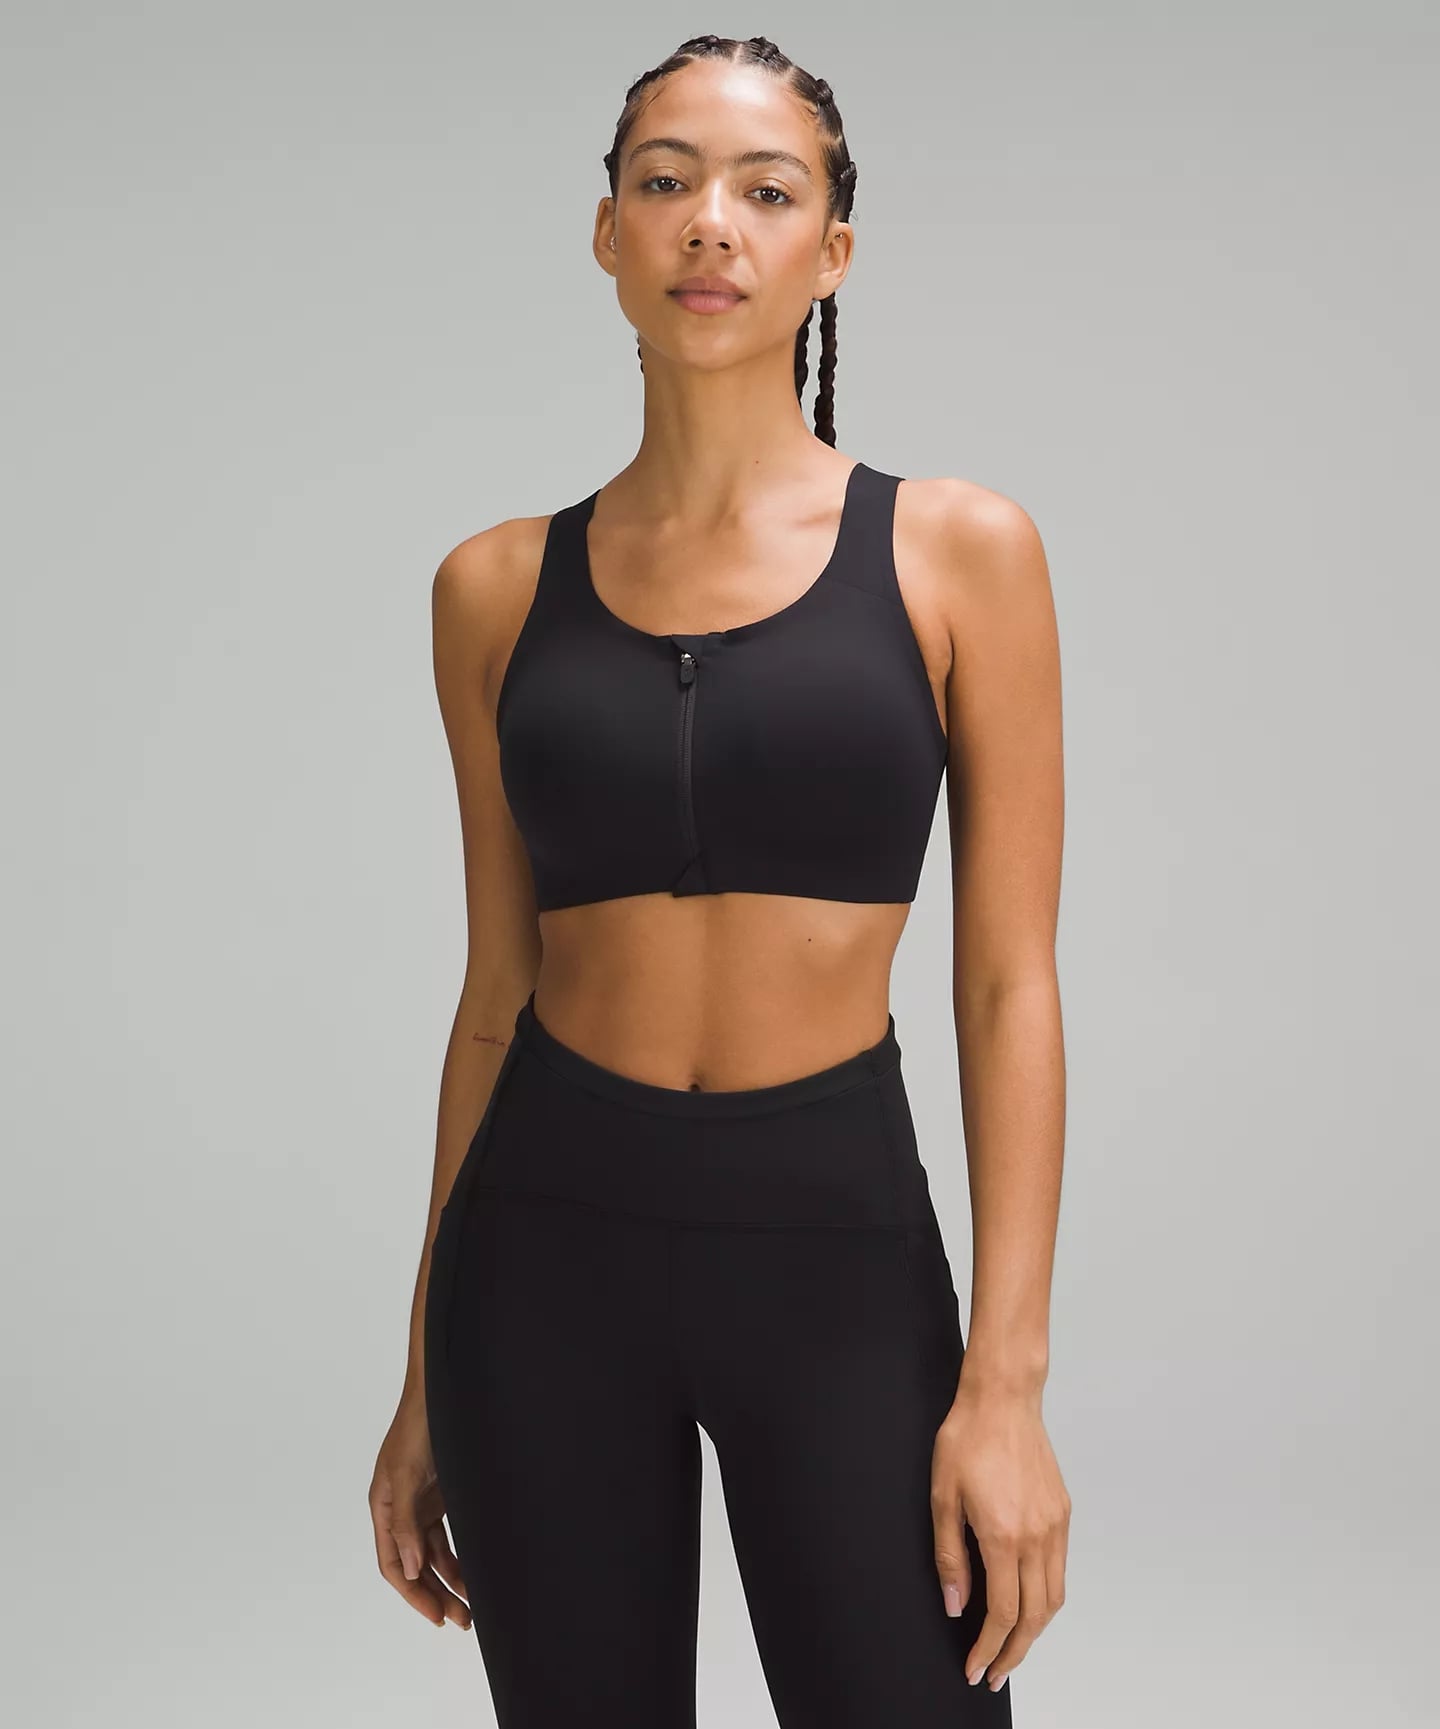 Pin by Gray on Exercise 6   shopping, Exercise, Sports bra